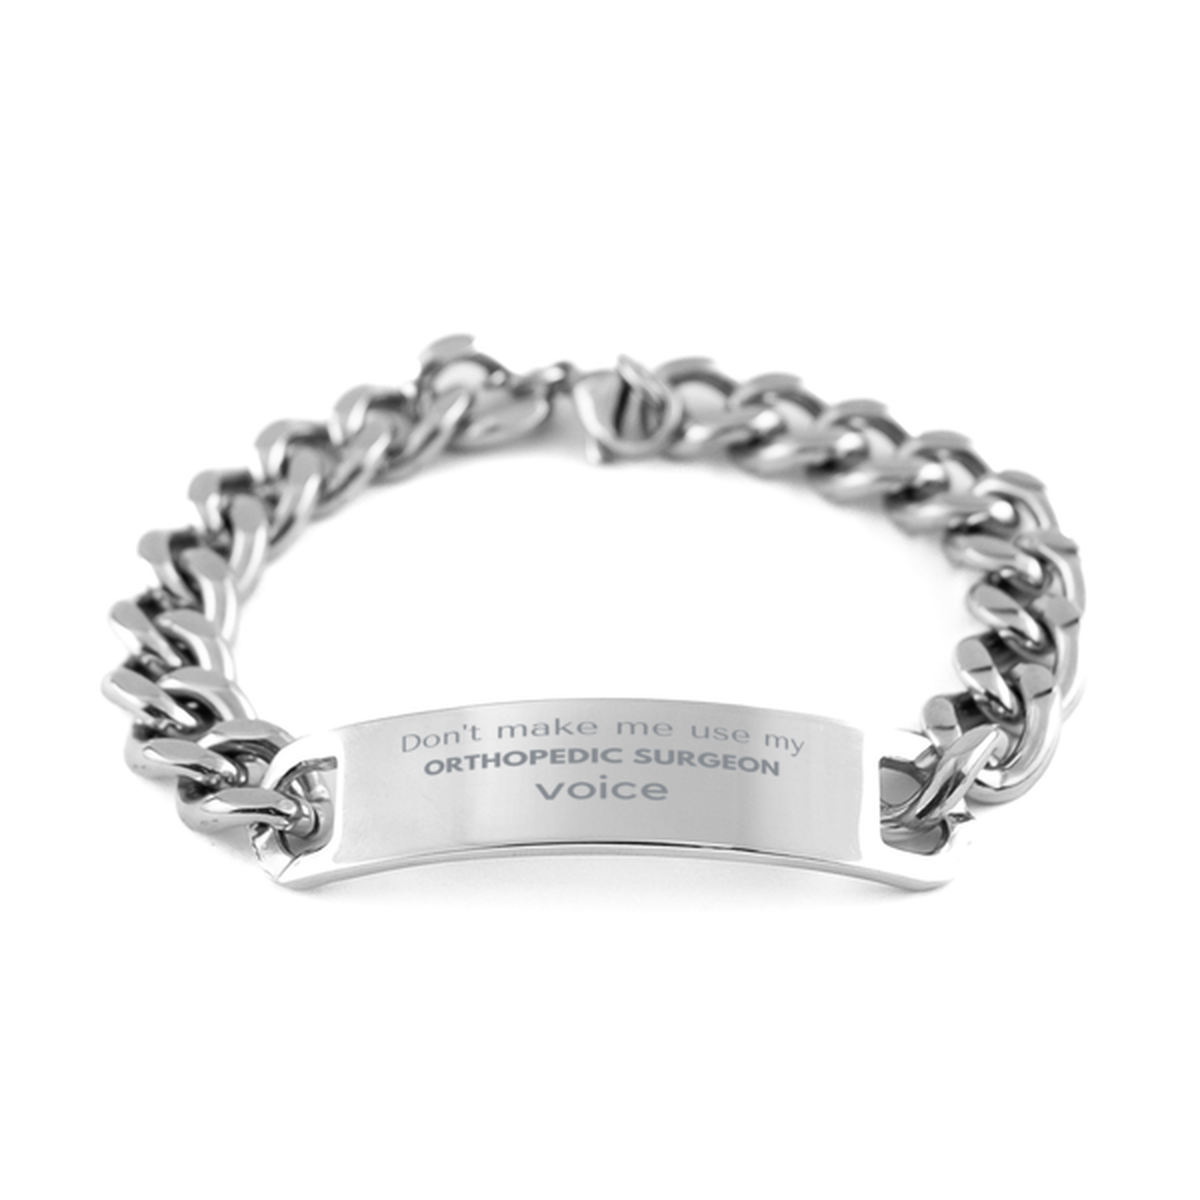 Don't make me use my Orthopedic Surgeon voice, Sarcasm Orthopedic Surgeon Gifts, Christmas Orthopedic Surgeon Cuban Chain Stainless Steel Bracelet Birthday Unique Gifts For Orthopedic Surgeon Coworkers, Men, Women, Colleague, Friends